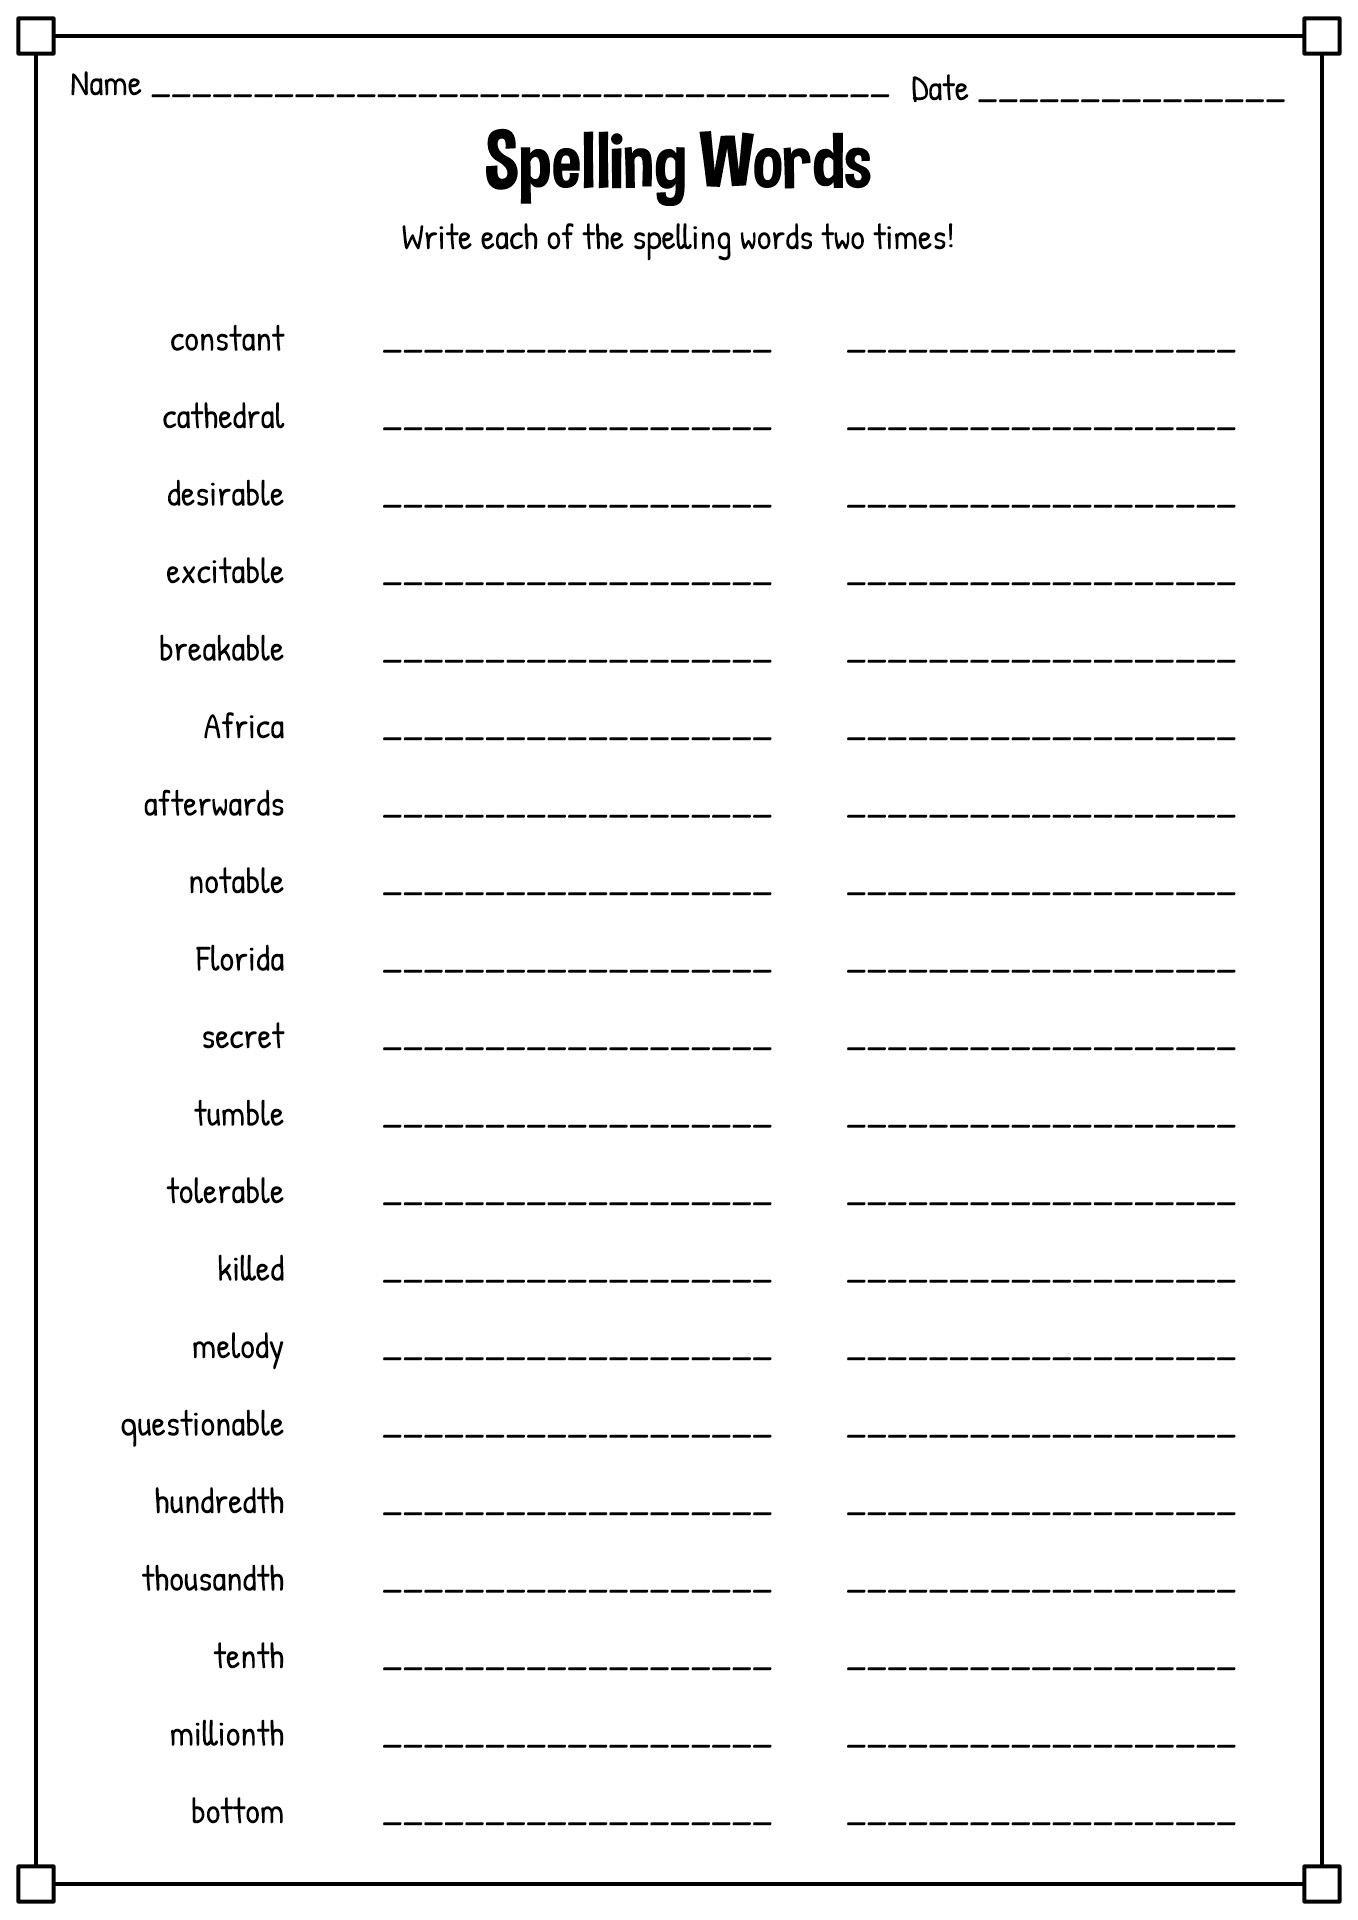 13-best-images-of-spelling-worksheets-for-adults-adult-spelling